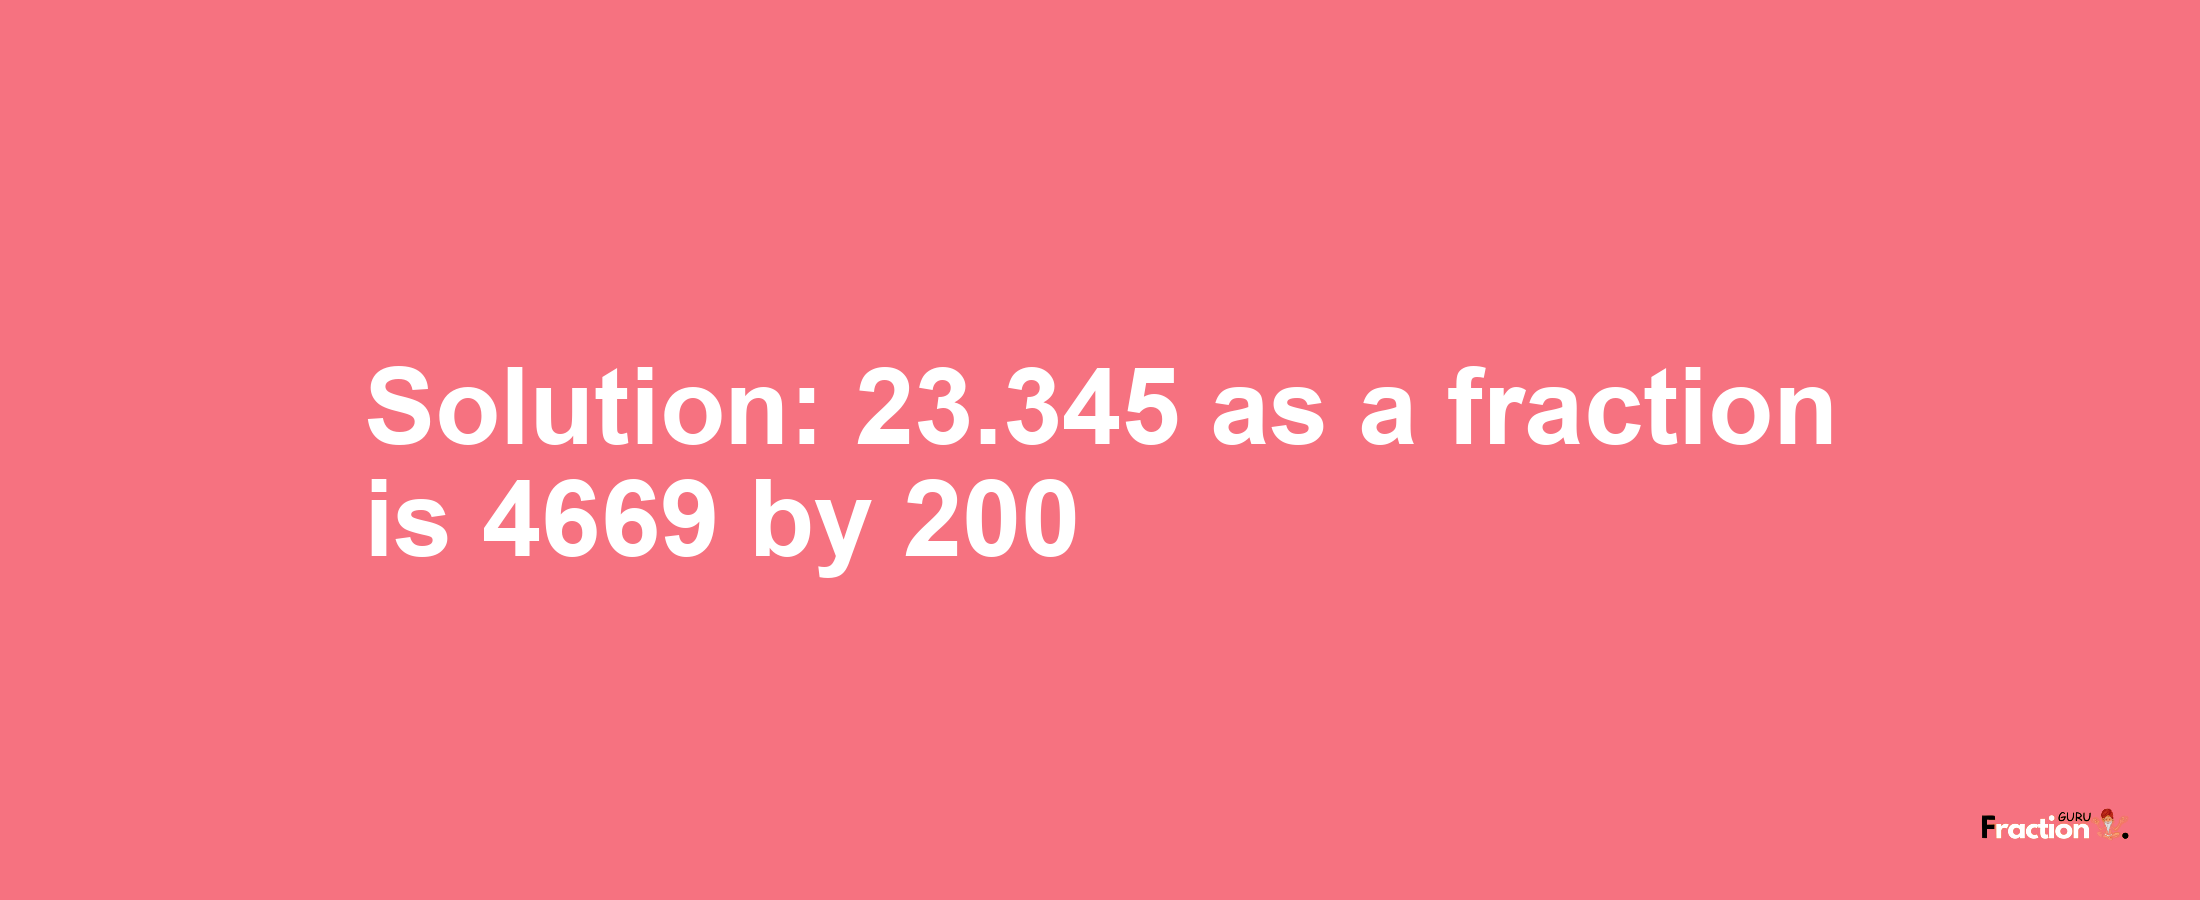 Solution:23.345 as a fraction is 4669/200